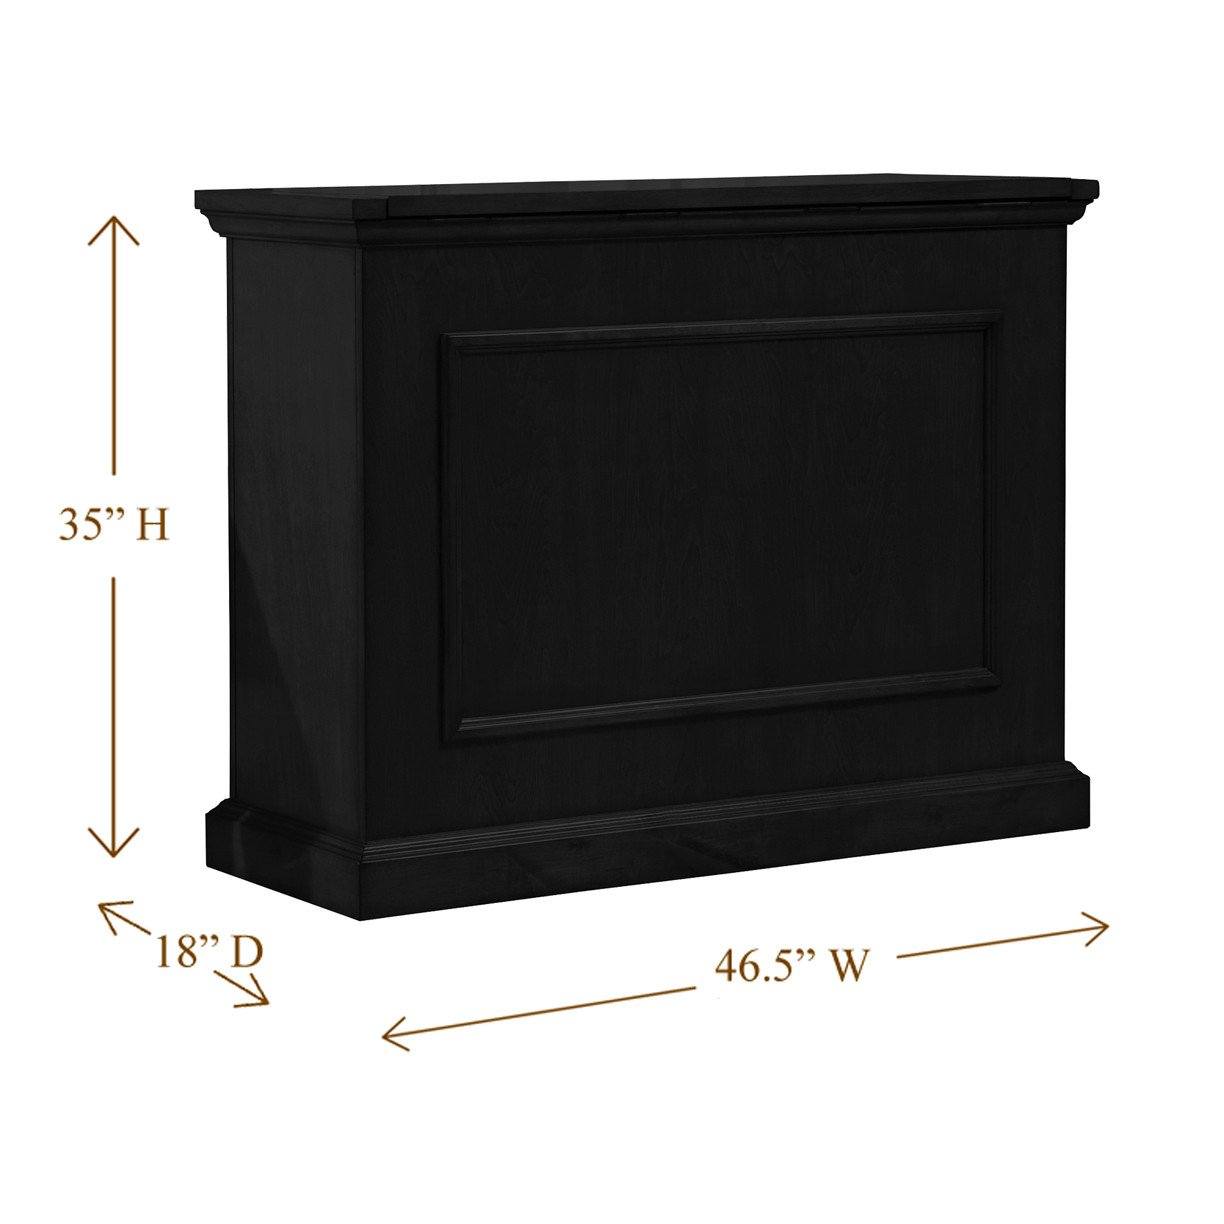 Touchstone Elevate - Black Tv Lift Cabinets For Up To 42” Flat Screen Tv’S Tv Lift Cabinets Touchstone 